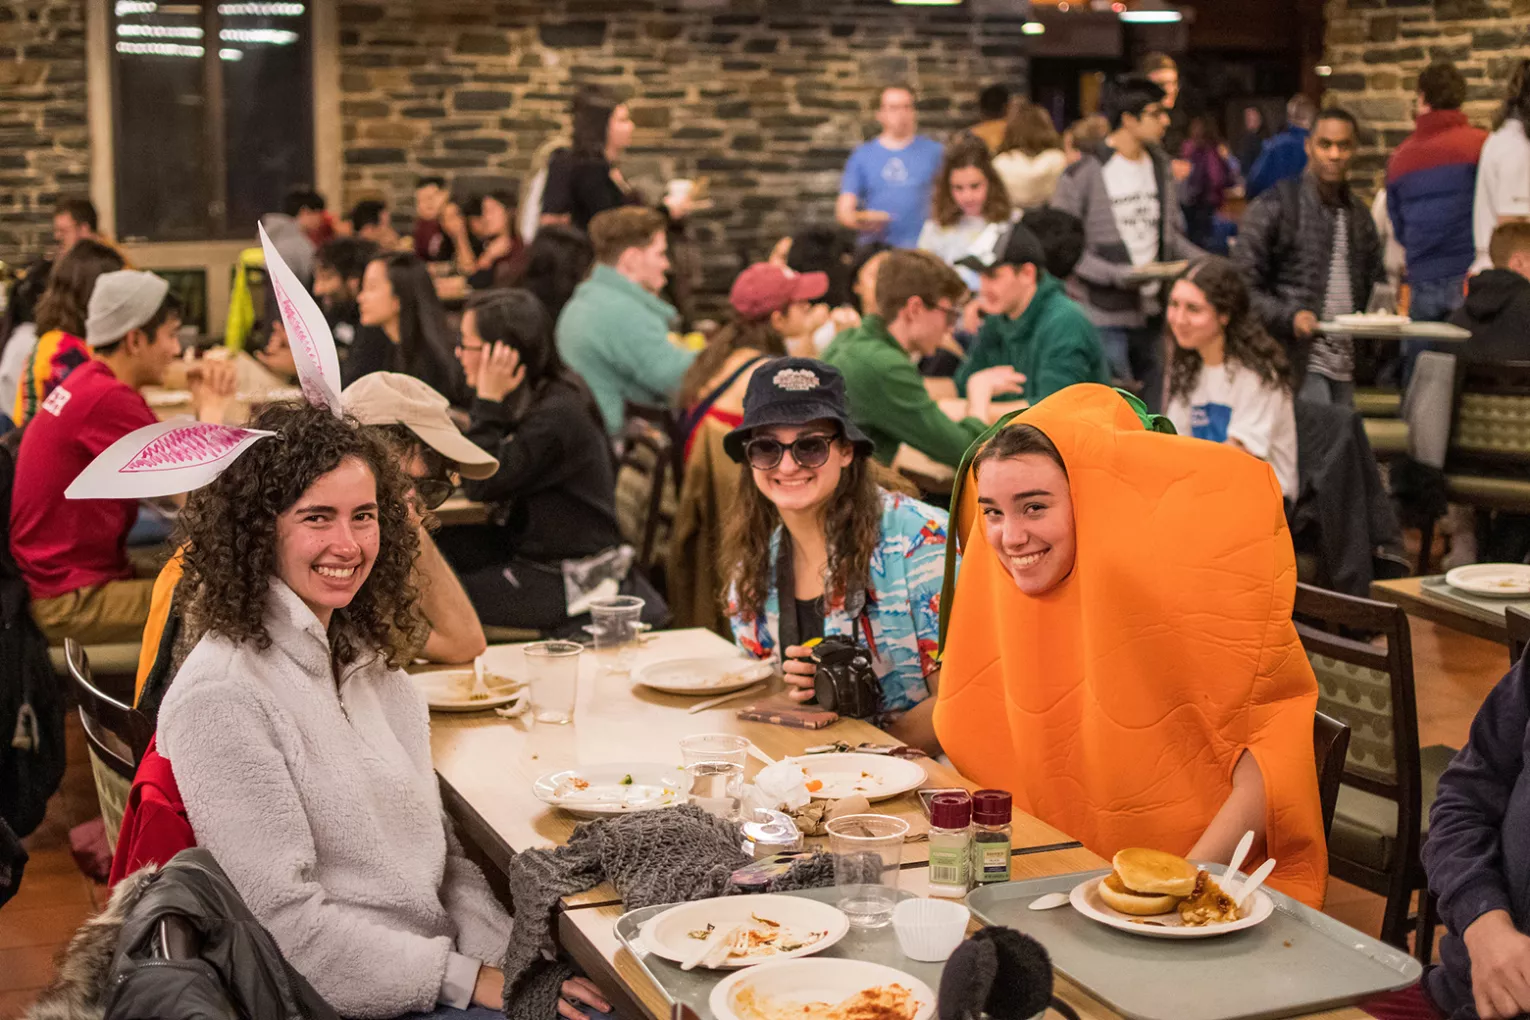 Student dressed as carrot sits at table